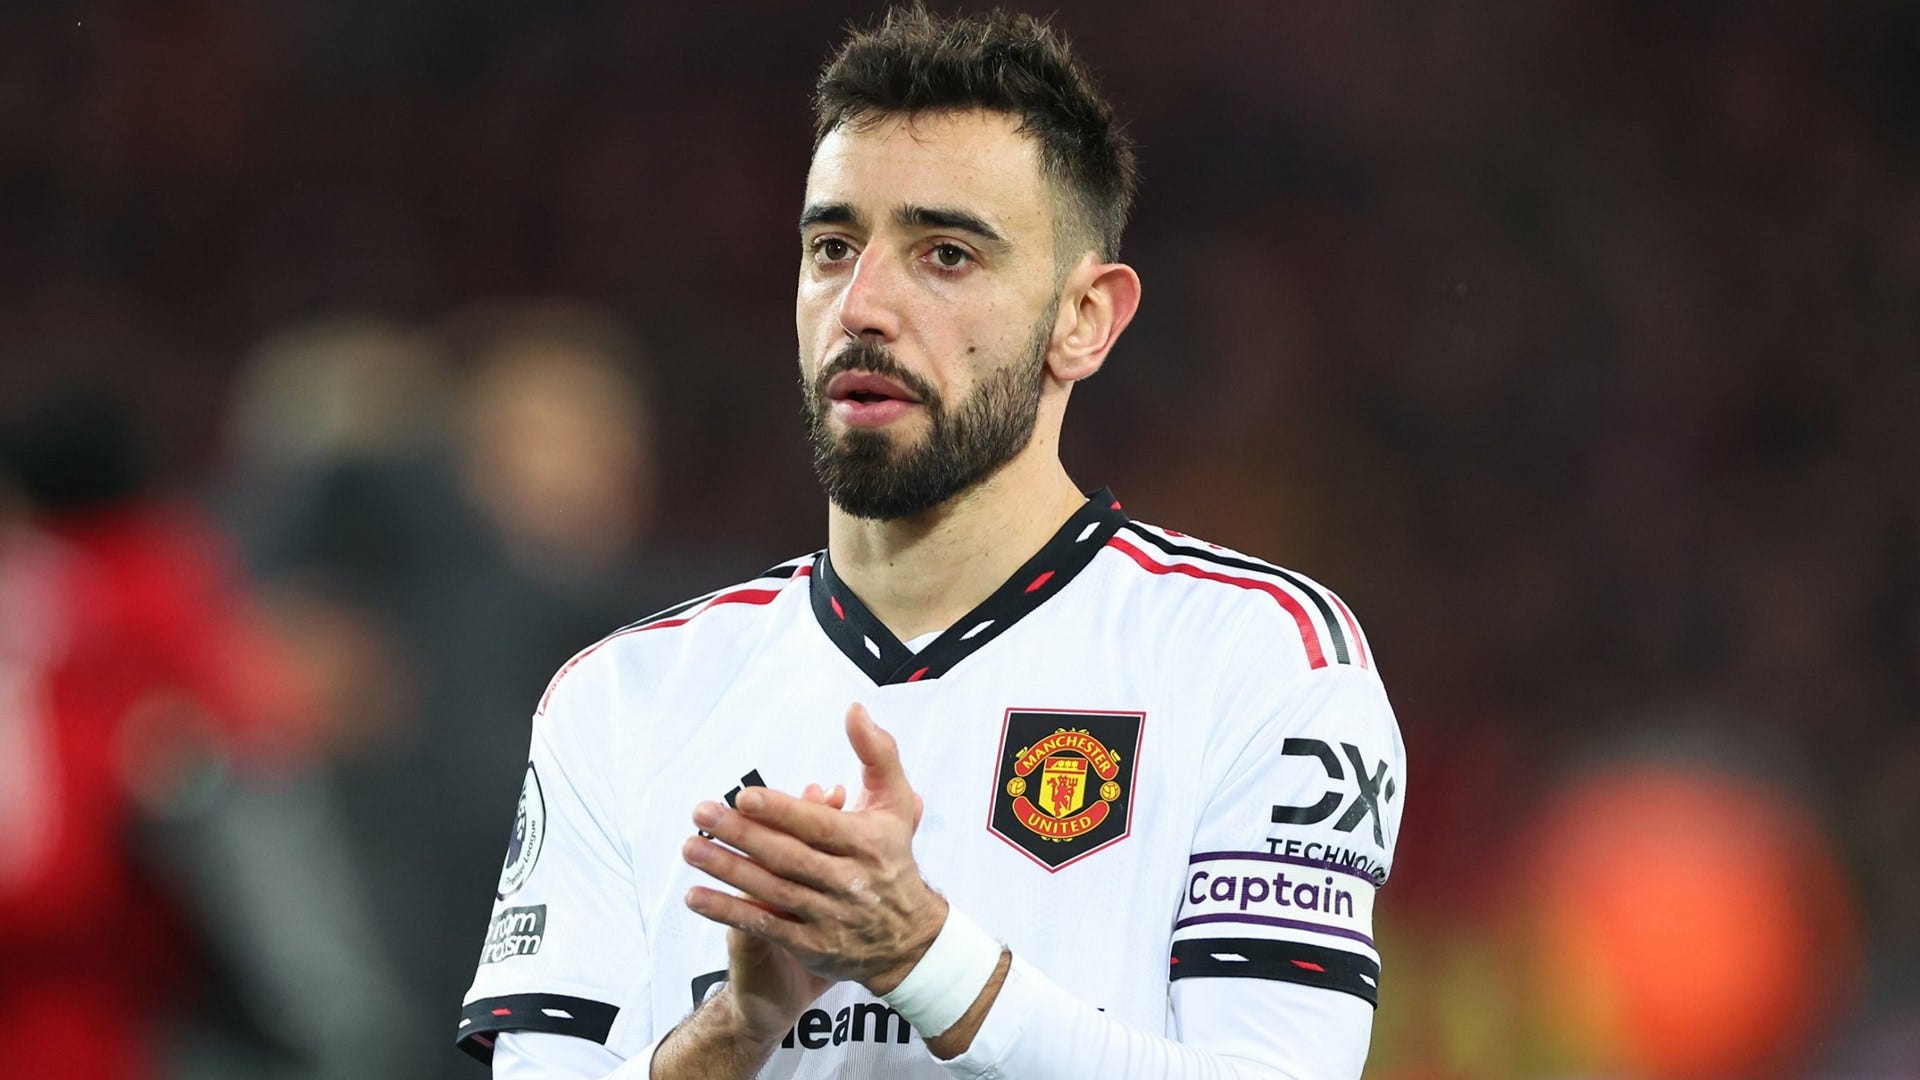 Bruno Fernandes MUST be stripped of the Man Utd captaincy after